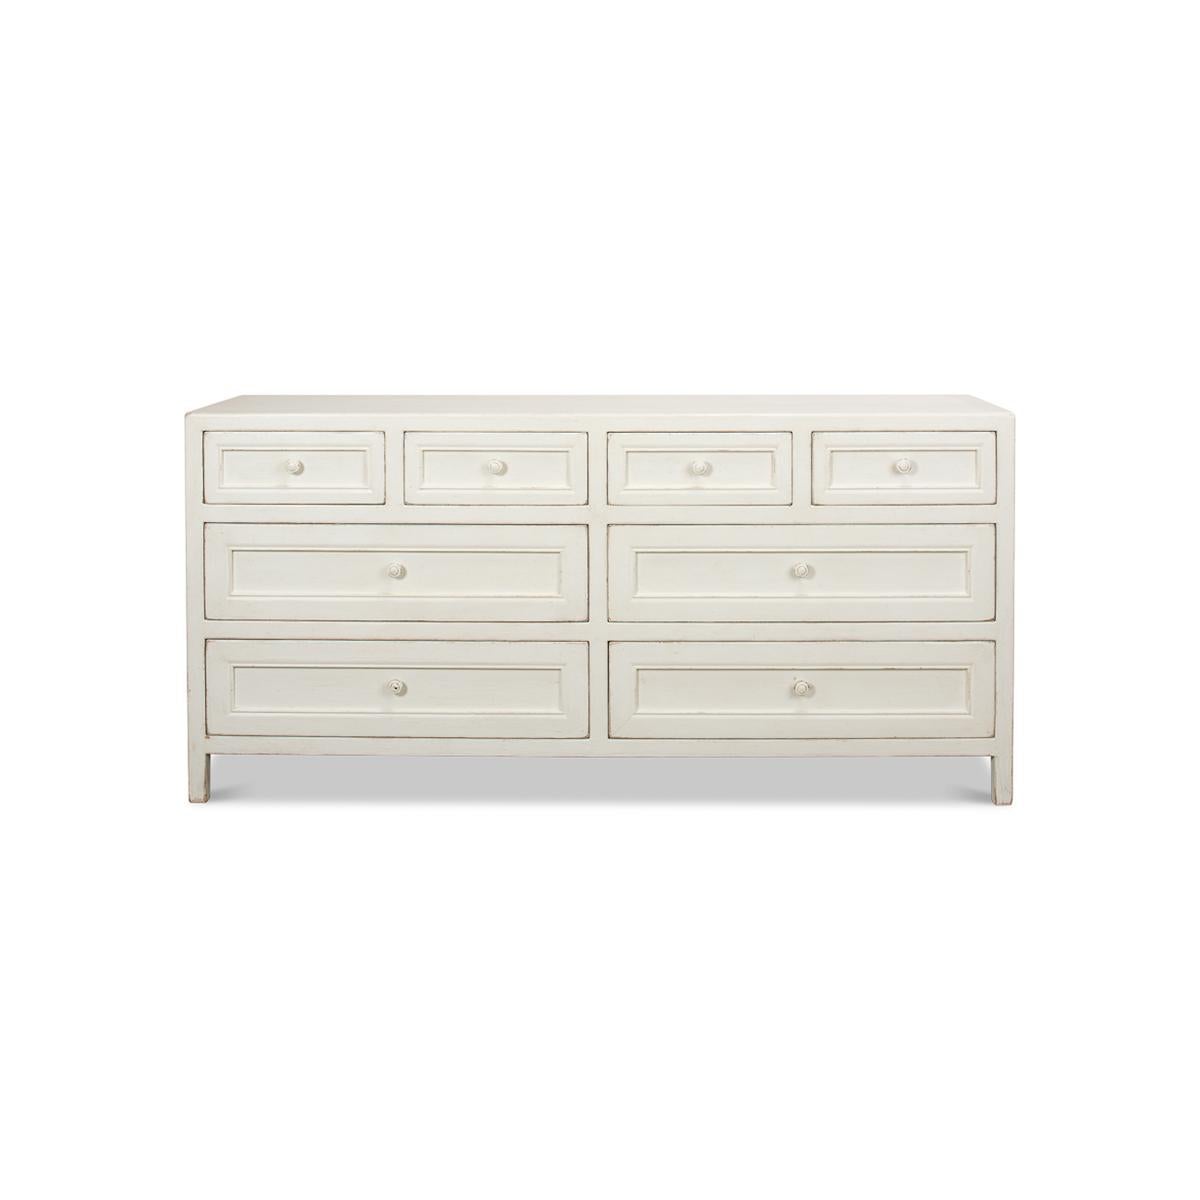 An antiqued white Rustic painted dresser with eight drawers. Reclaimed pine painted and distressed with four short and four long drawers. Influenced by antique Chinese furniture, this dresser is ideal in modern or traditional